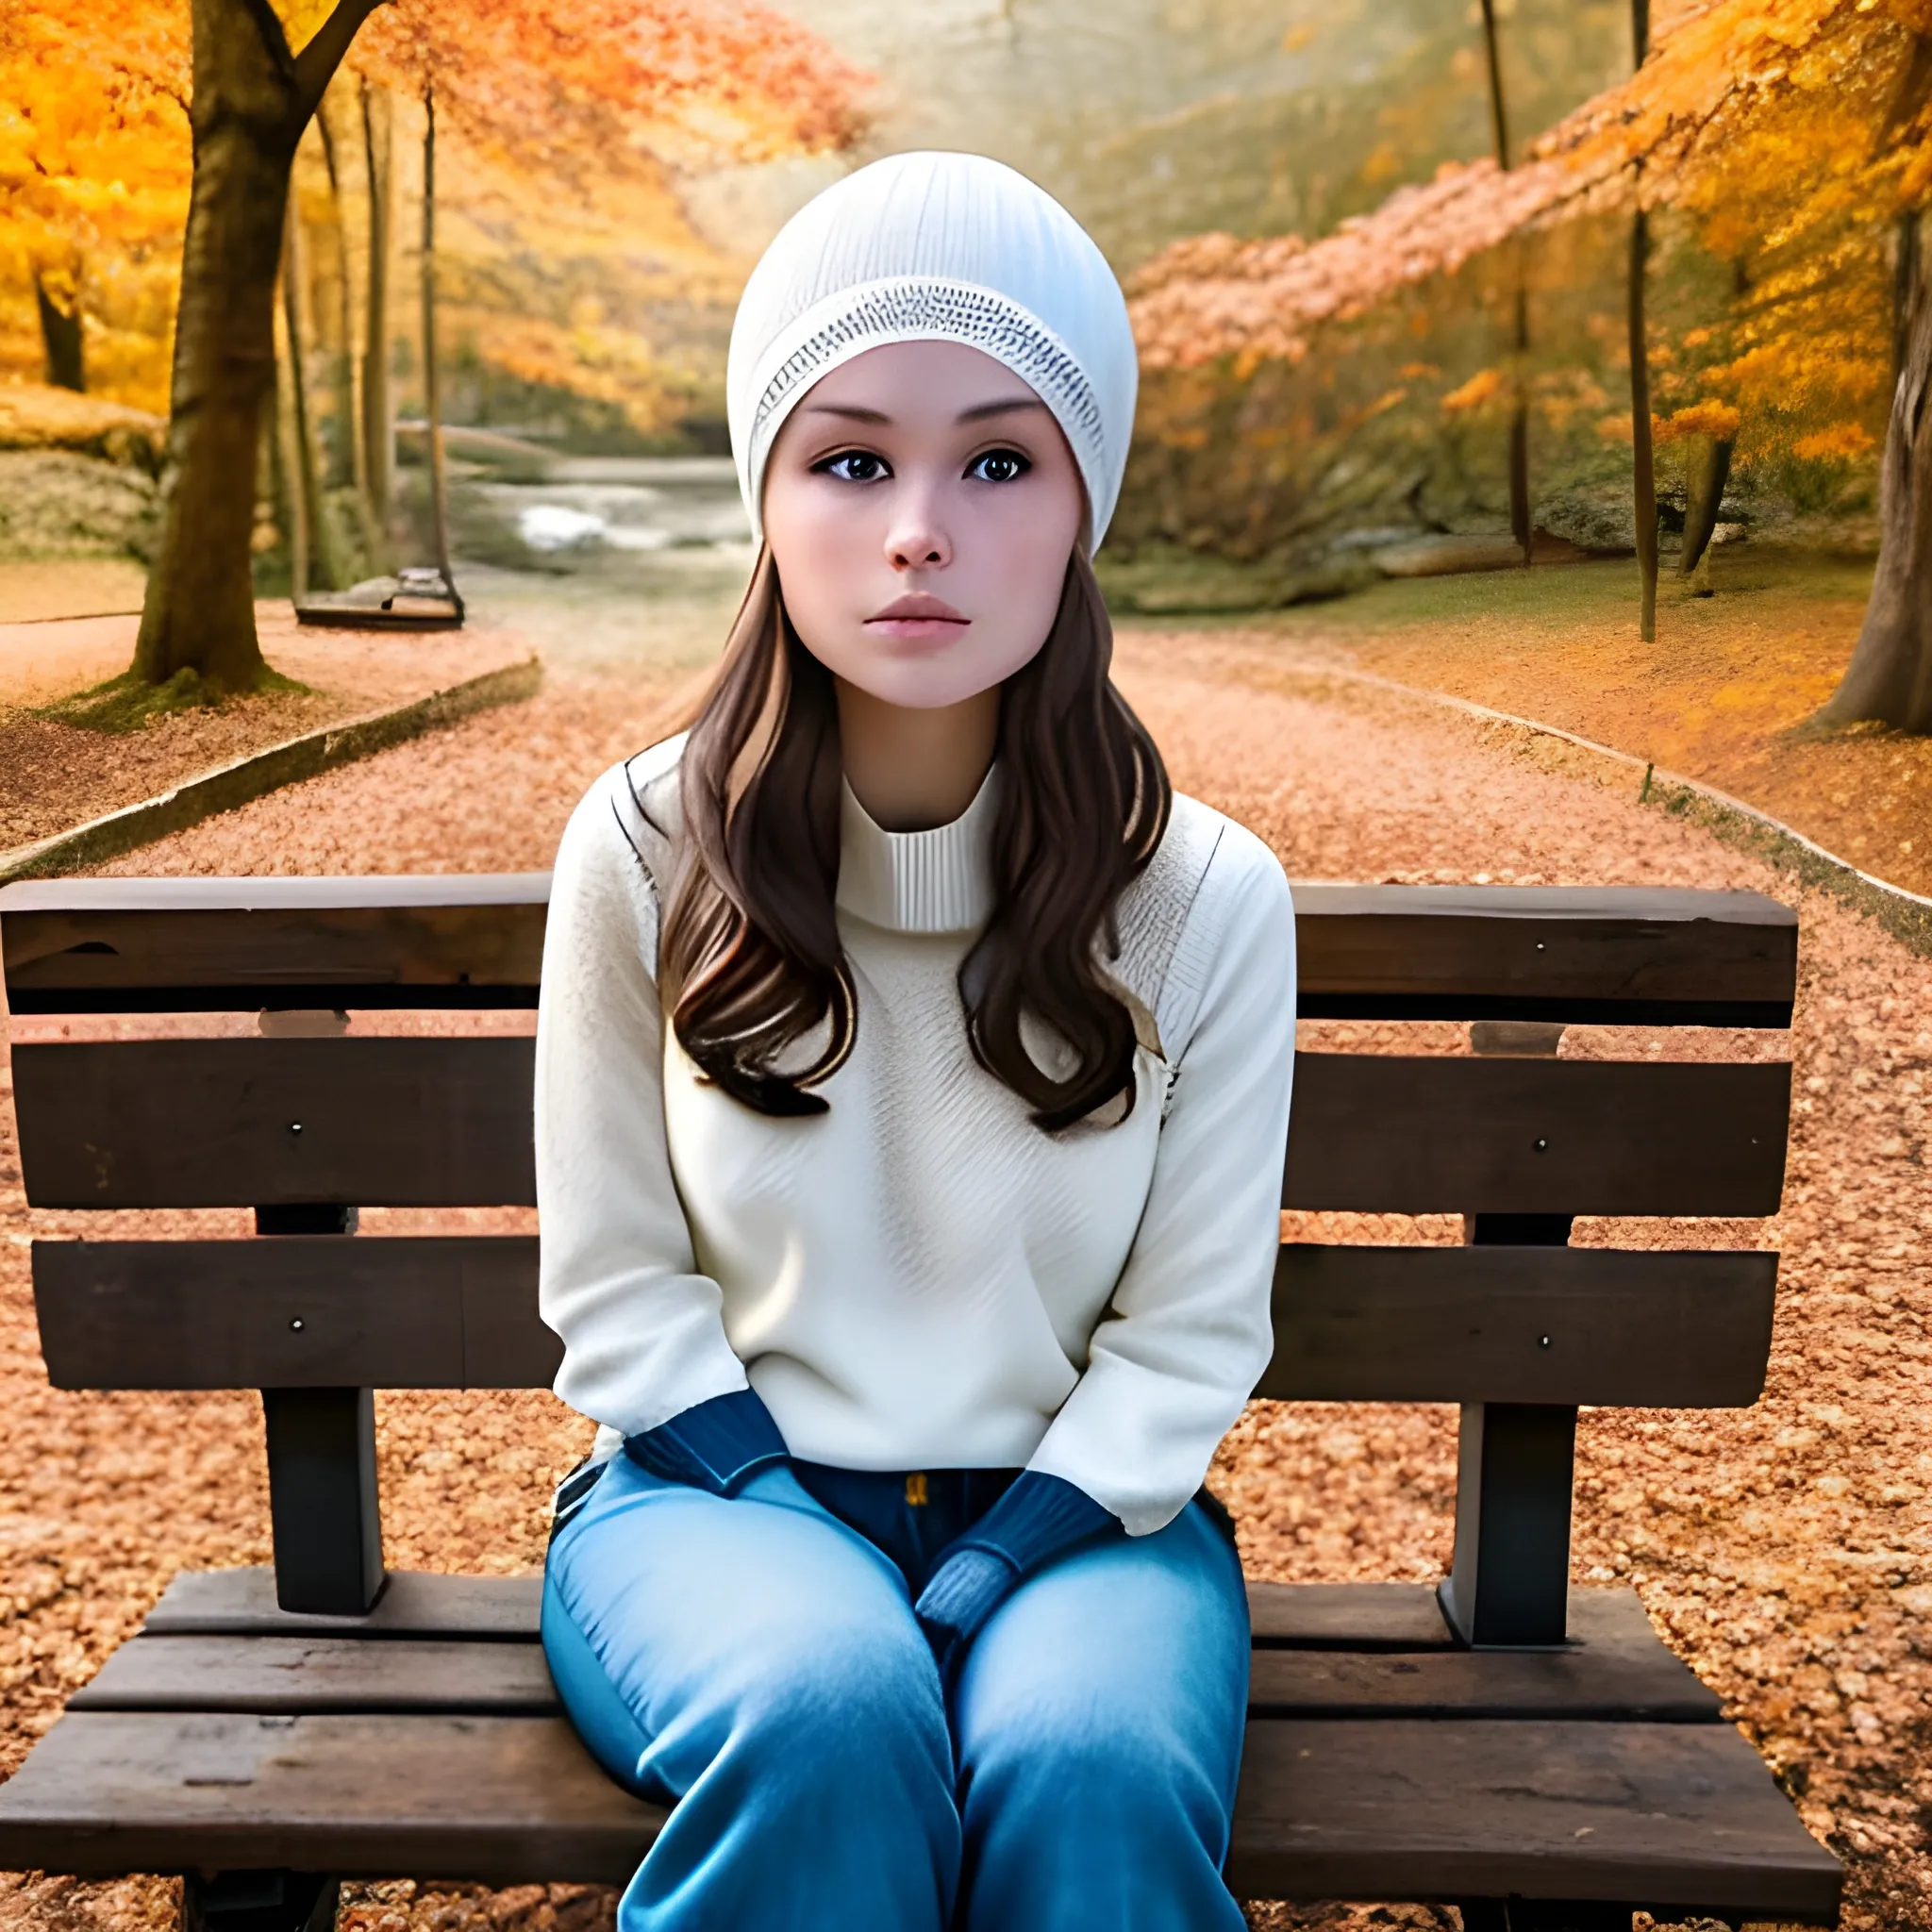 solo, masterpiece, best quality, medium shot, Beautiful mikaylademaiter in an autumn forest, beautiful waterfall, sitting on park bench, perfect face, fit, (white beanie:1.2), (brown knit sweater:1.2), (denim pants), vivid orange trees